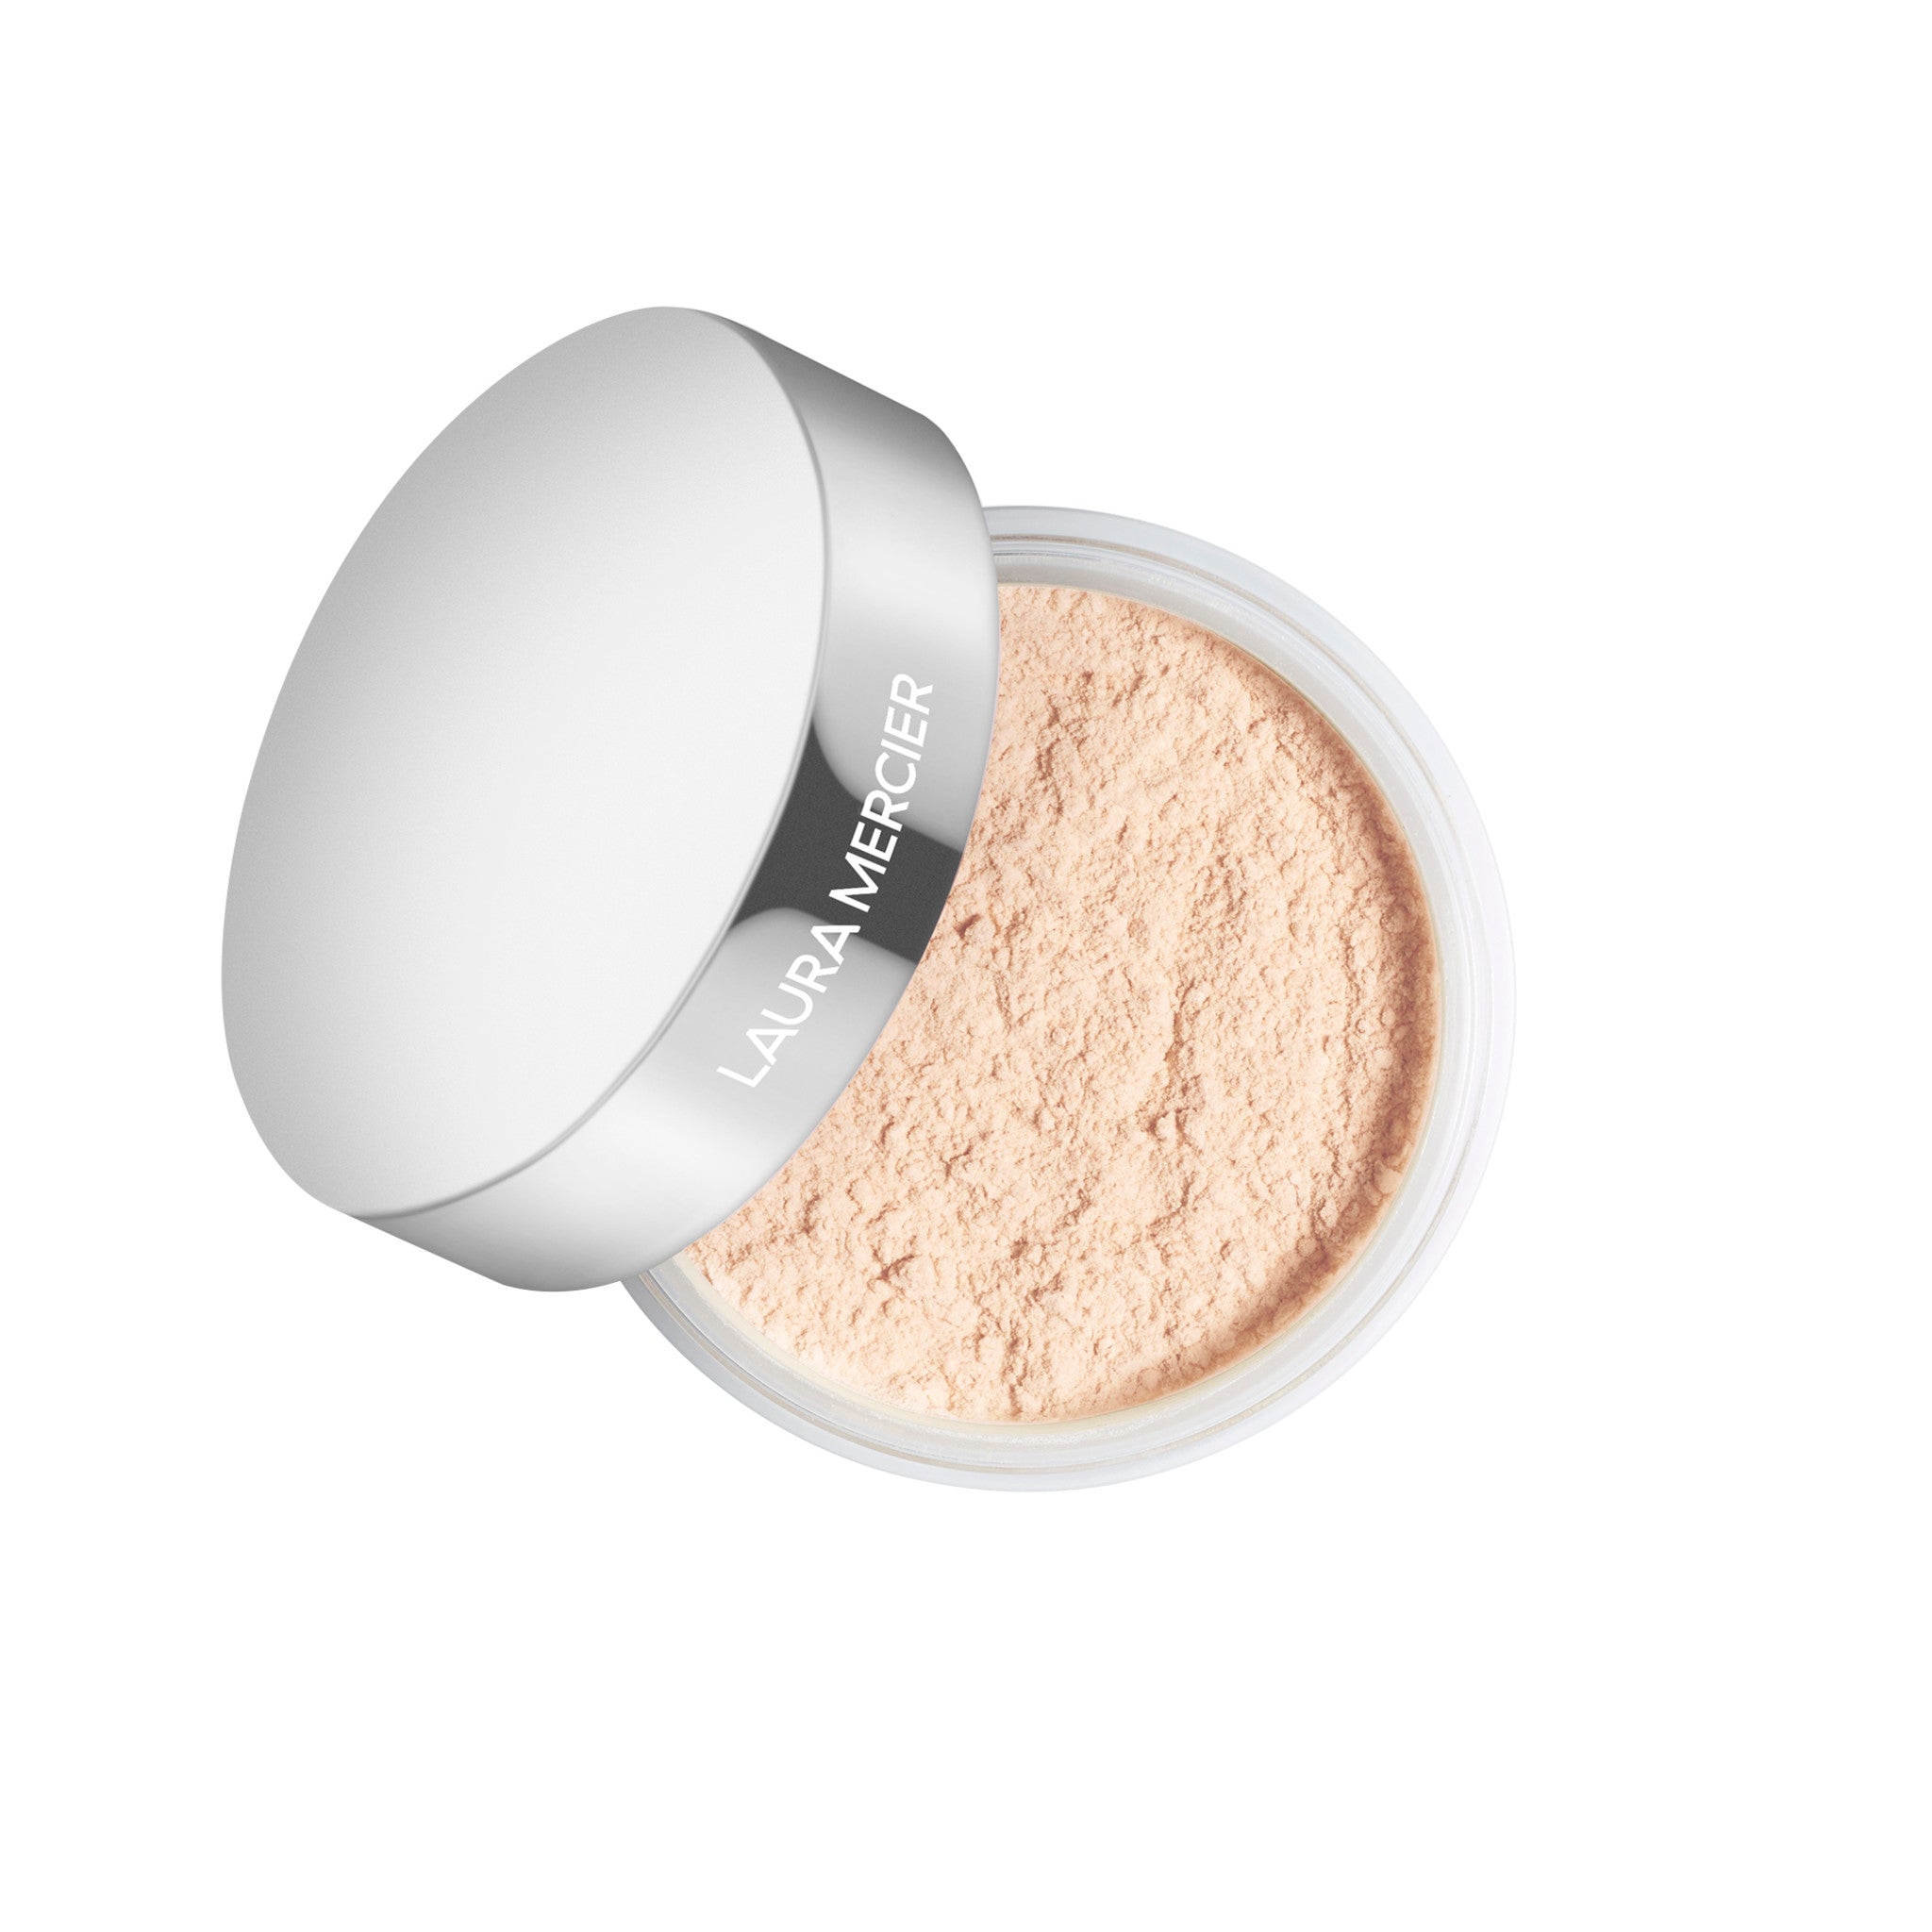 Laura Mercier Translucent Loose Setting Powder Light Catcher Color/Shade variant: Celestial Light main image. This product is for light complexions